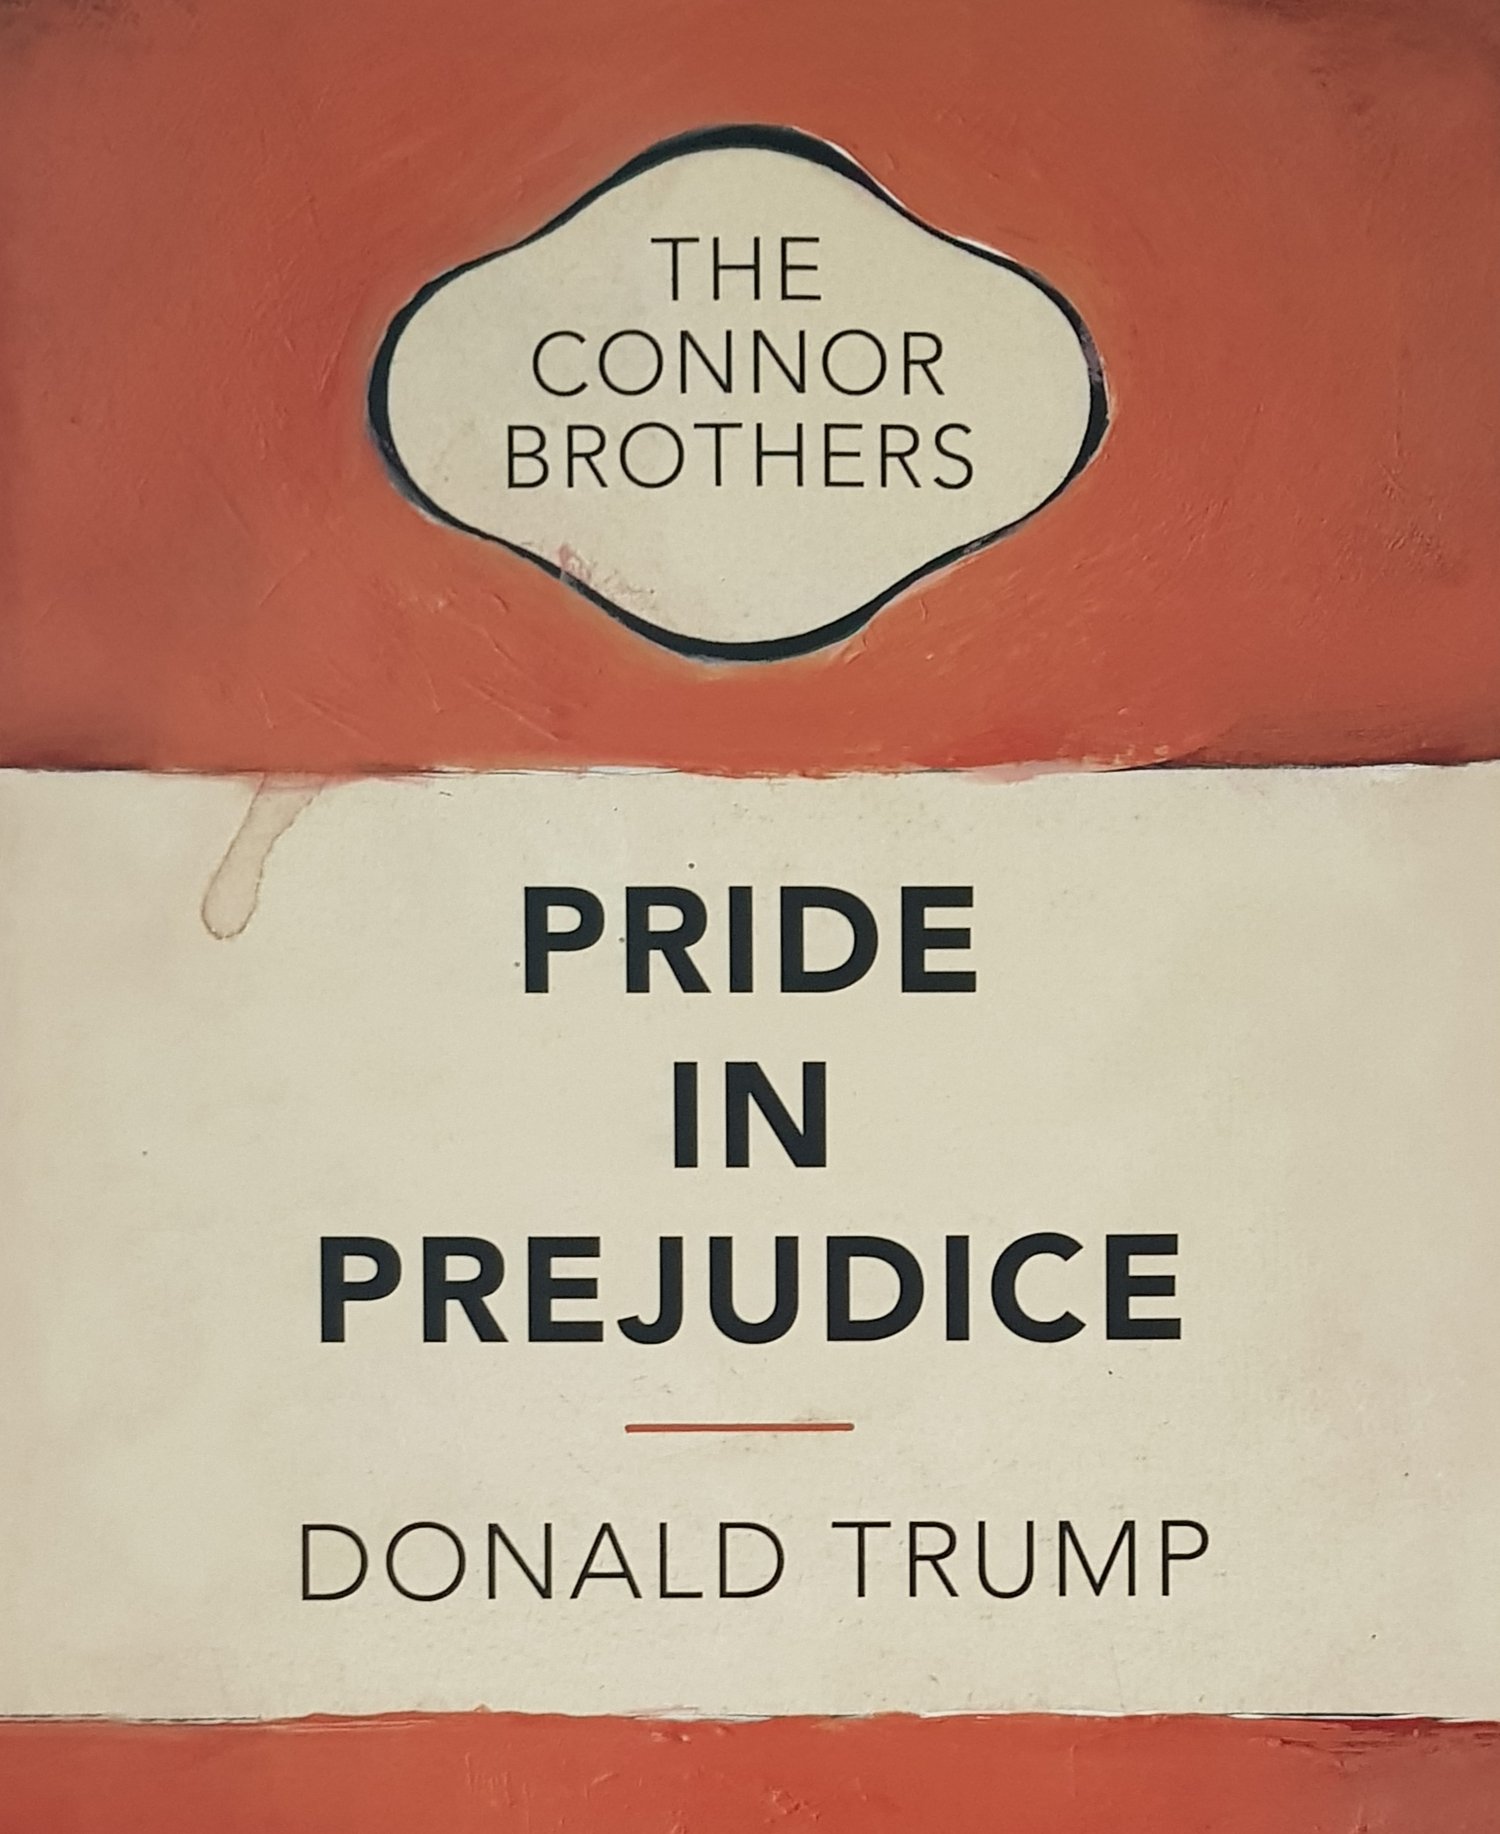 Image of THE CONNOR BROTHERS - "PRIDE IN PREJUDICE" - LIMITED EDITION 35 - 50CM X 75CM